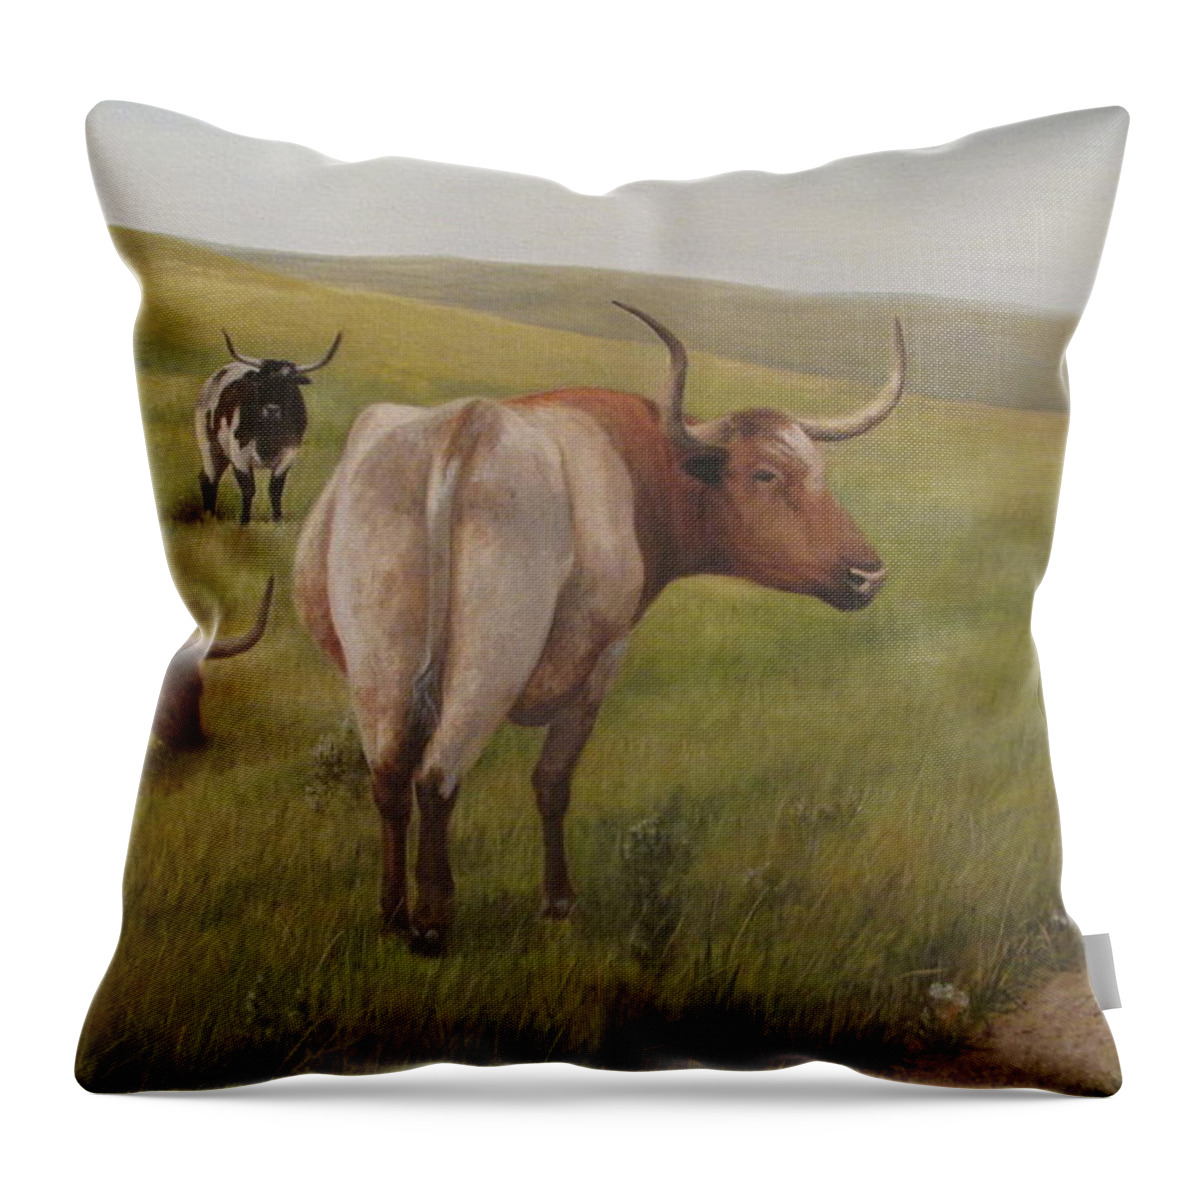 Long Horns Throw Pillow featuring the painting Long Horns by Tammy Taylor